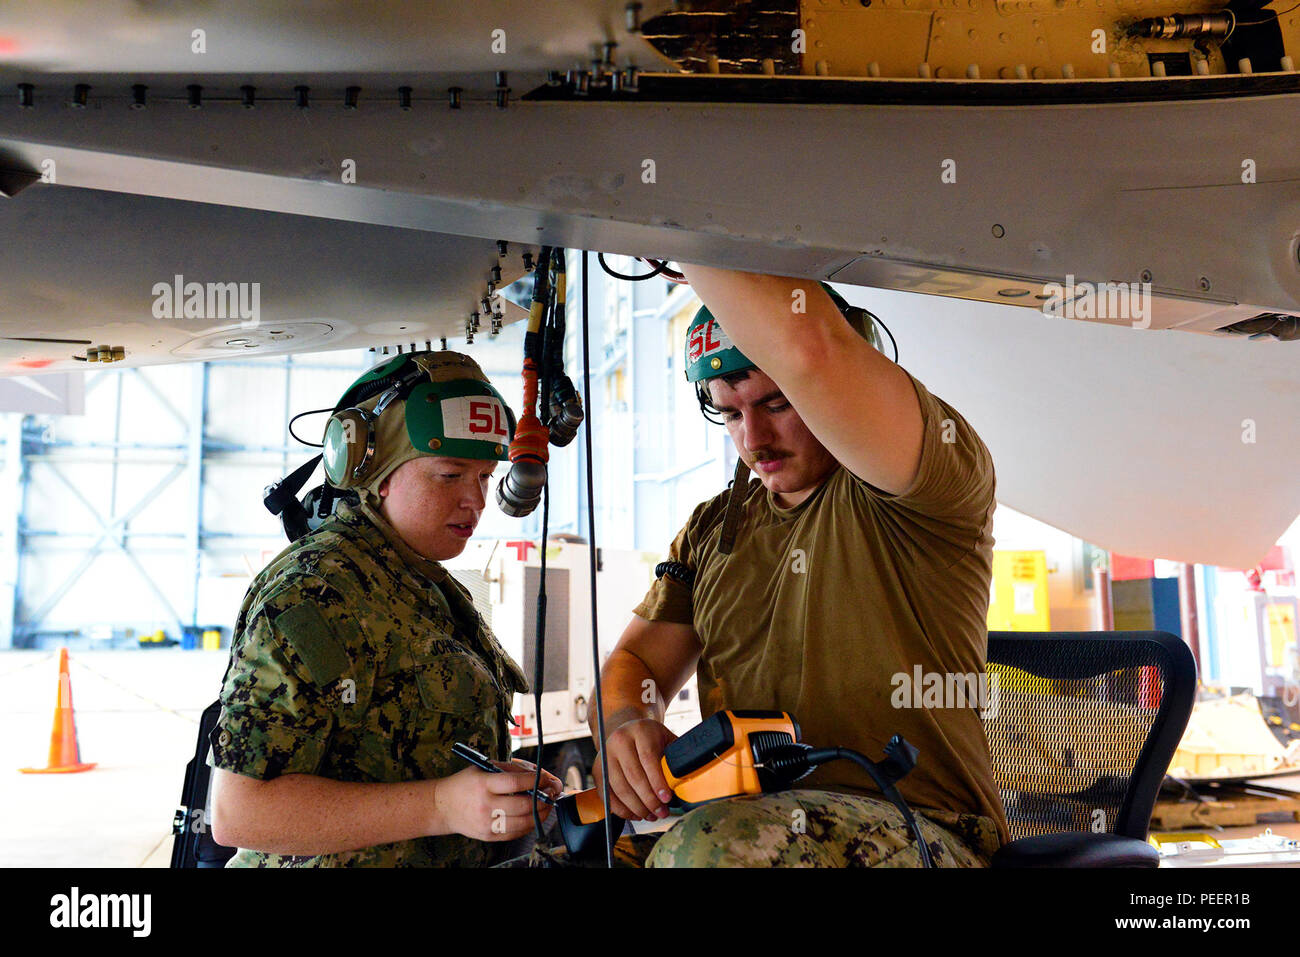 150812-N-OK605-002 MISAWA, Japan (Aug. 12, 2015) Aviation Structural Mechanic Equipment 2nd Class Alex Stults (right), from Springfield, Ill., and Aviation Structural Mechanic Equipment 3rd Class Karla Johnstun (left), from Rainier, Ore., both attached to the Scorpions of Electronic Attack Squadron (VAQ) 132, verify engine serial numbers on one of their EA18-G Growler fighter jets. VAQ-132 arrived at Misawa Air Base three weeks ago and will complete a six month deployment before returning to Naval Air Station Whidbey Island, Wash. (U.S. Navy Photo by Mass Communication Specialist 3rd Class Sam Stock Photo